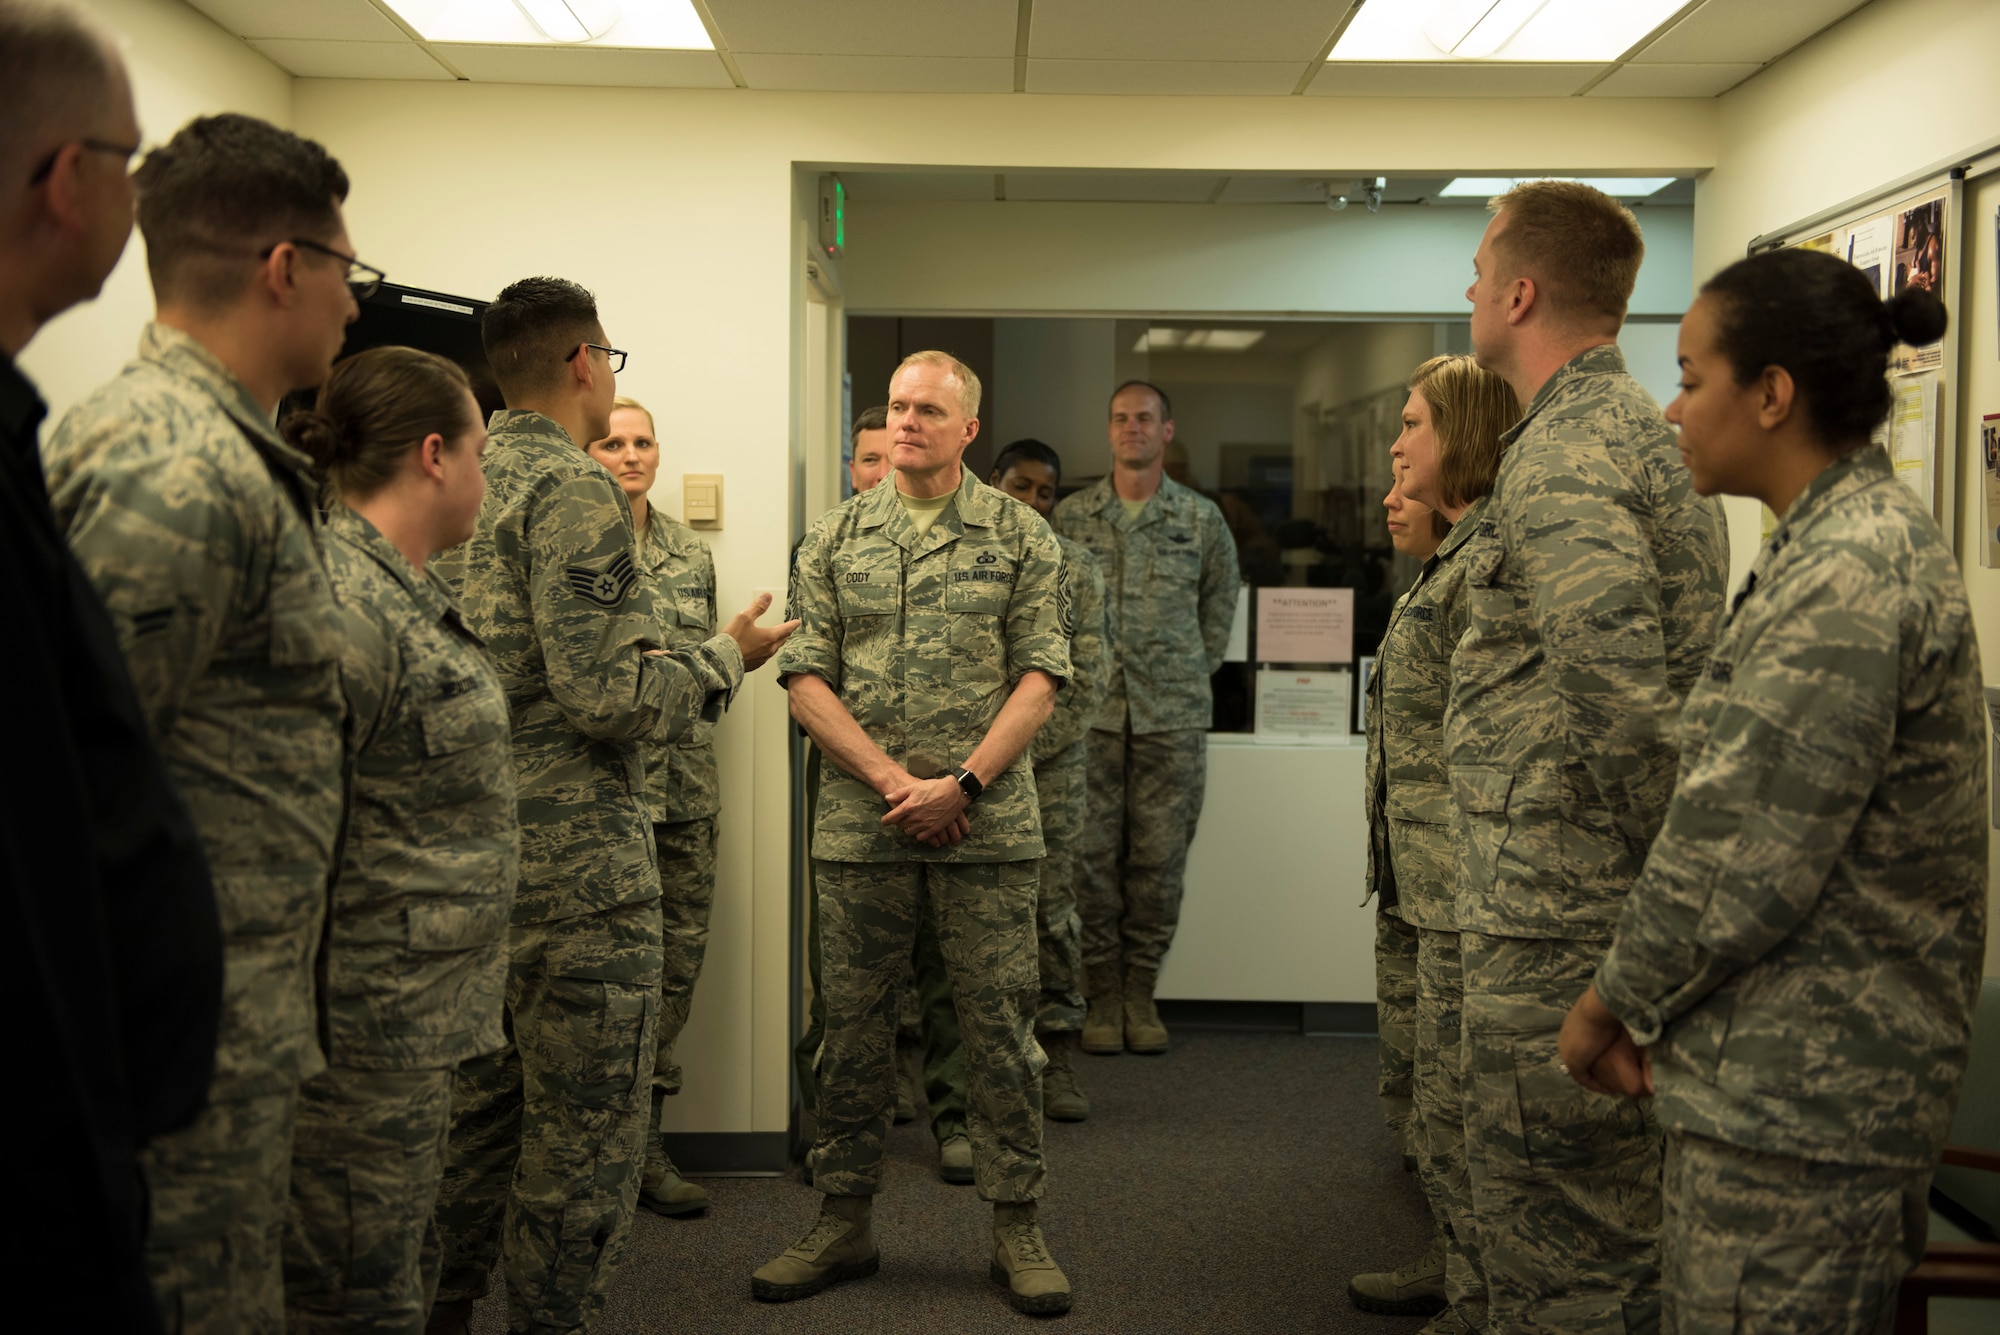 Staff Sgt. Landon Miracle, 366th Medical Operations Squadron mental health flight NCO in charge, briefs Chief Master Sgt. of the Air Force James Cody, May 5, 2016, at Mountain Home Air Force Base, Idaho. Cody discussed taking a more proactive approach to mental health to aid with the overall wellbeing of airmen. (U.S. Air Force photo by Airman Alaysia Berry/Released)